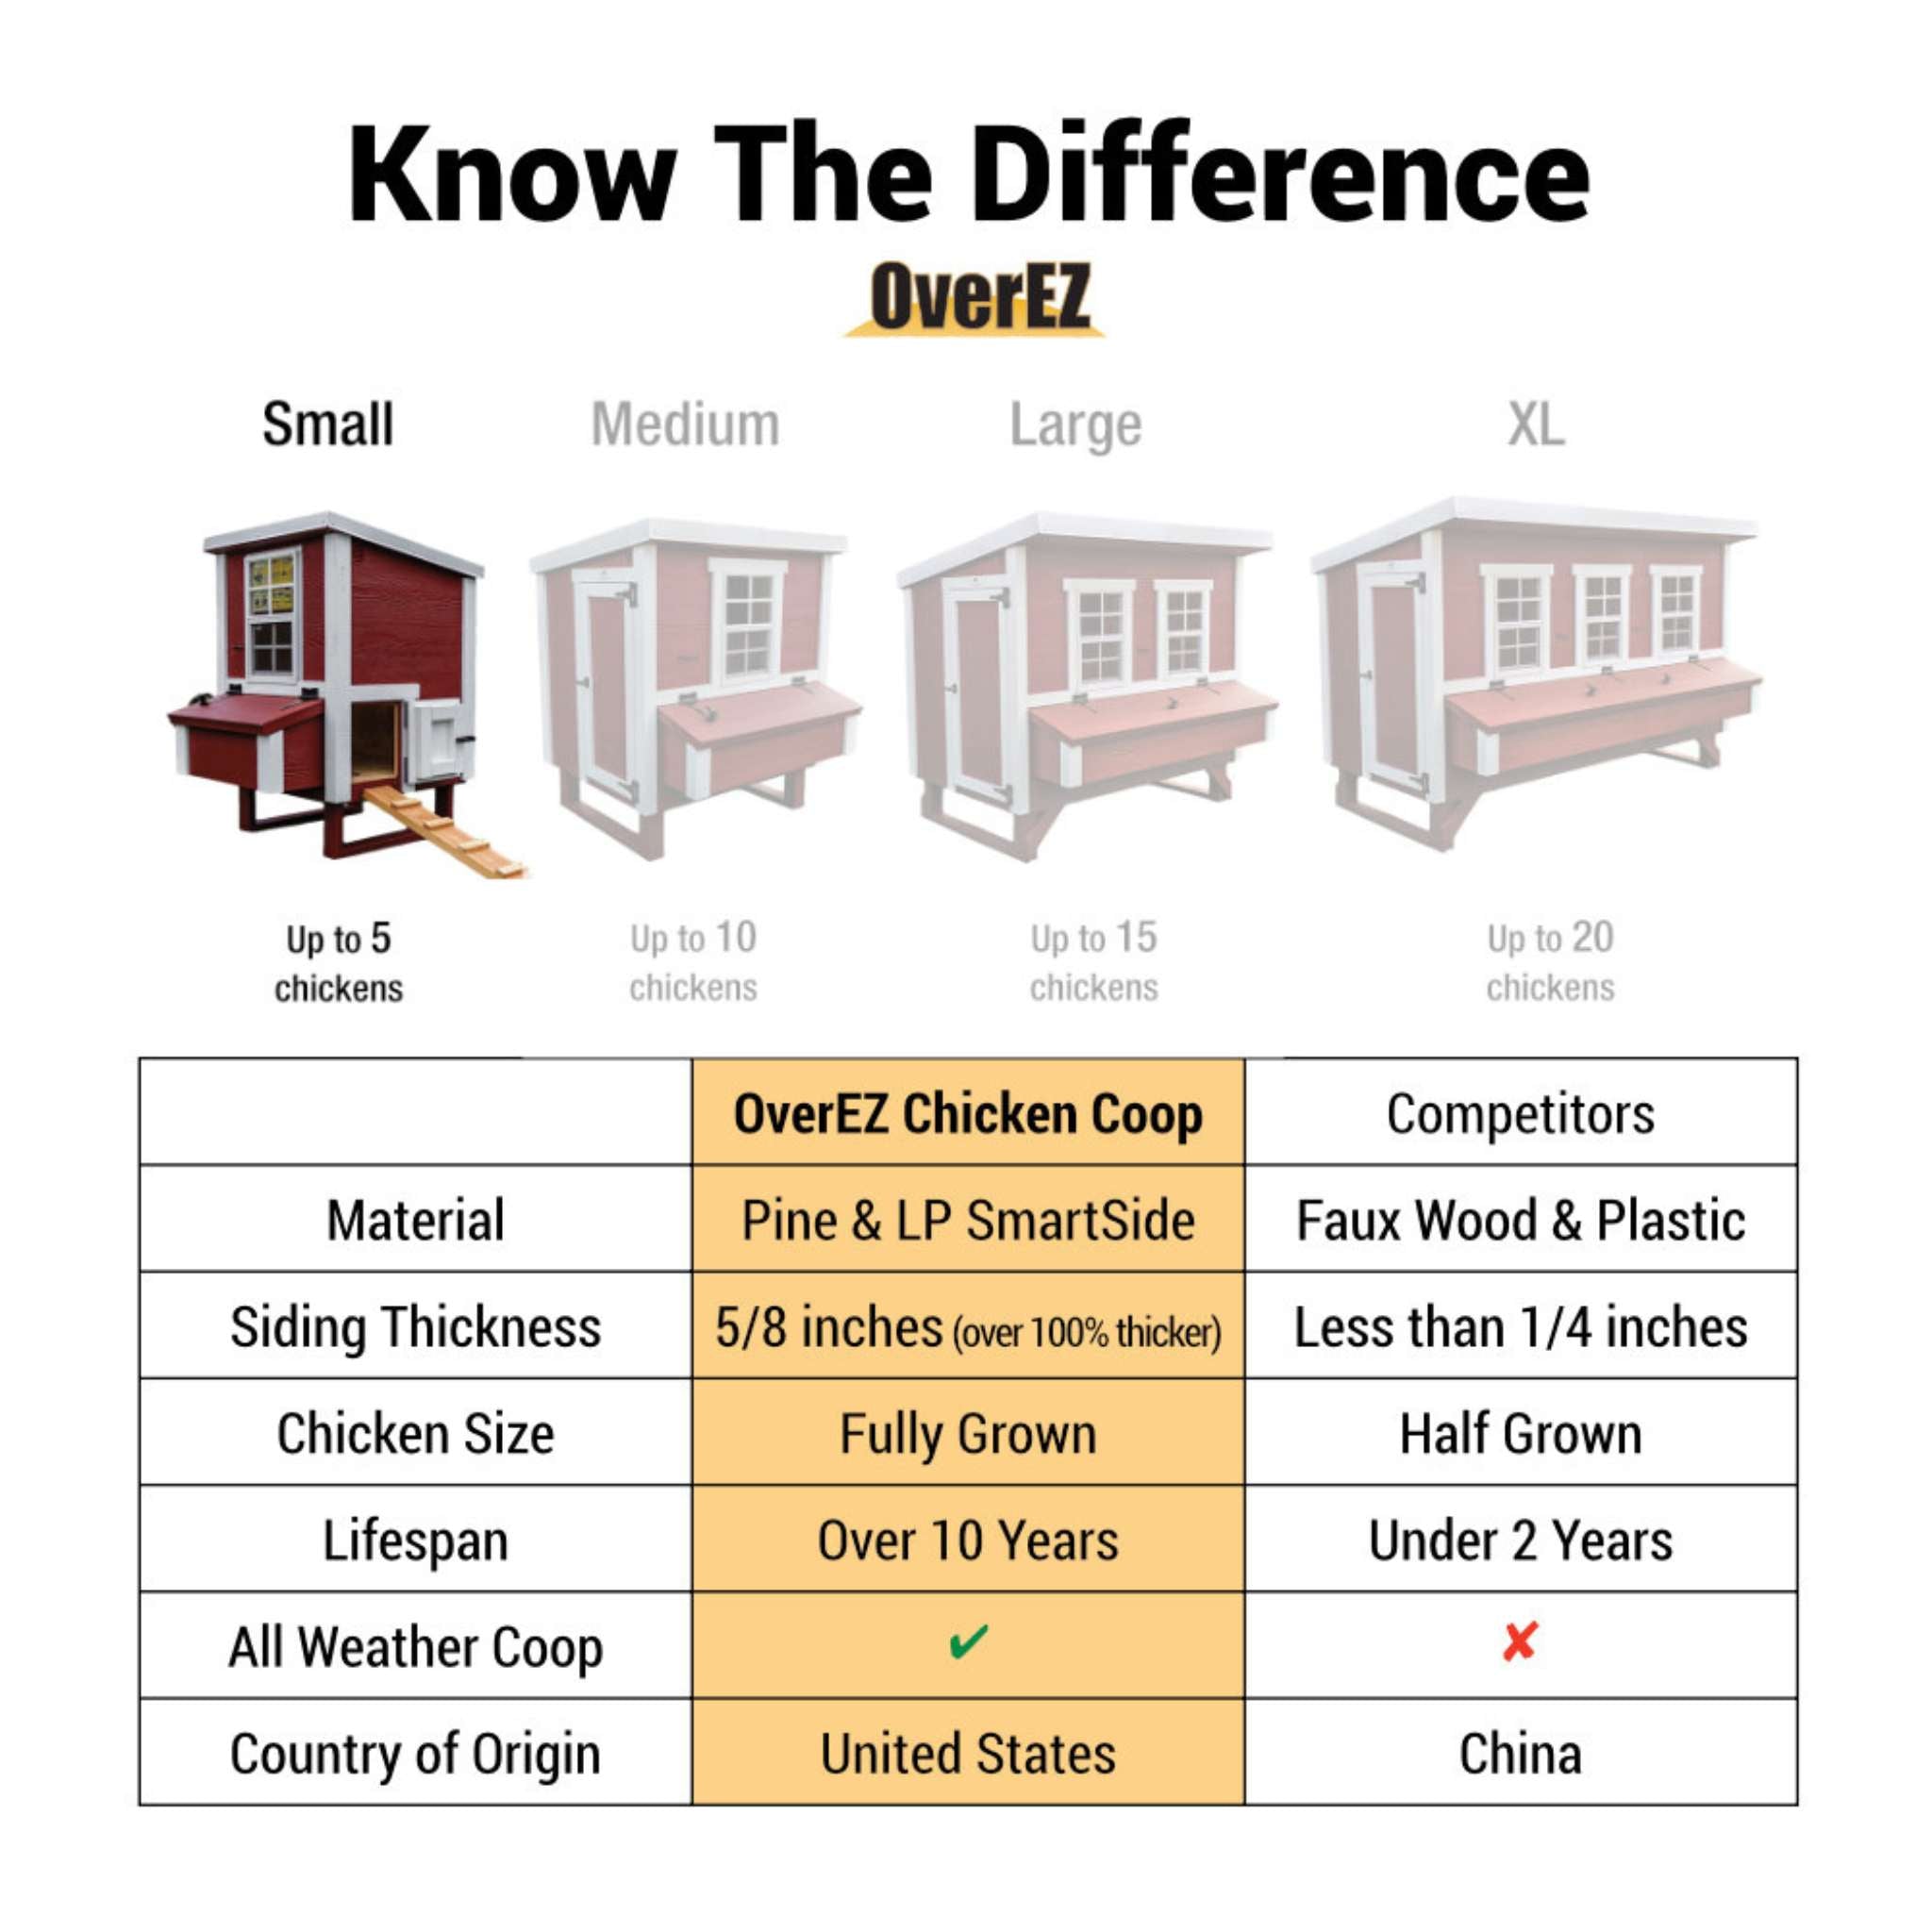 Hatching Time OverEZ. Small chicken coop is highlighted in infographic. Small chicken coop is made with Pine and LP SmartSide material,  is 5/8 of an inch thick for fully grown chickens and can last over 10 years.